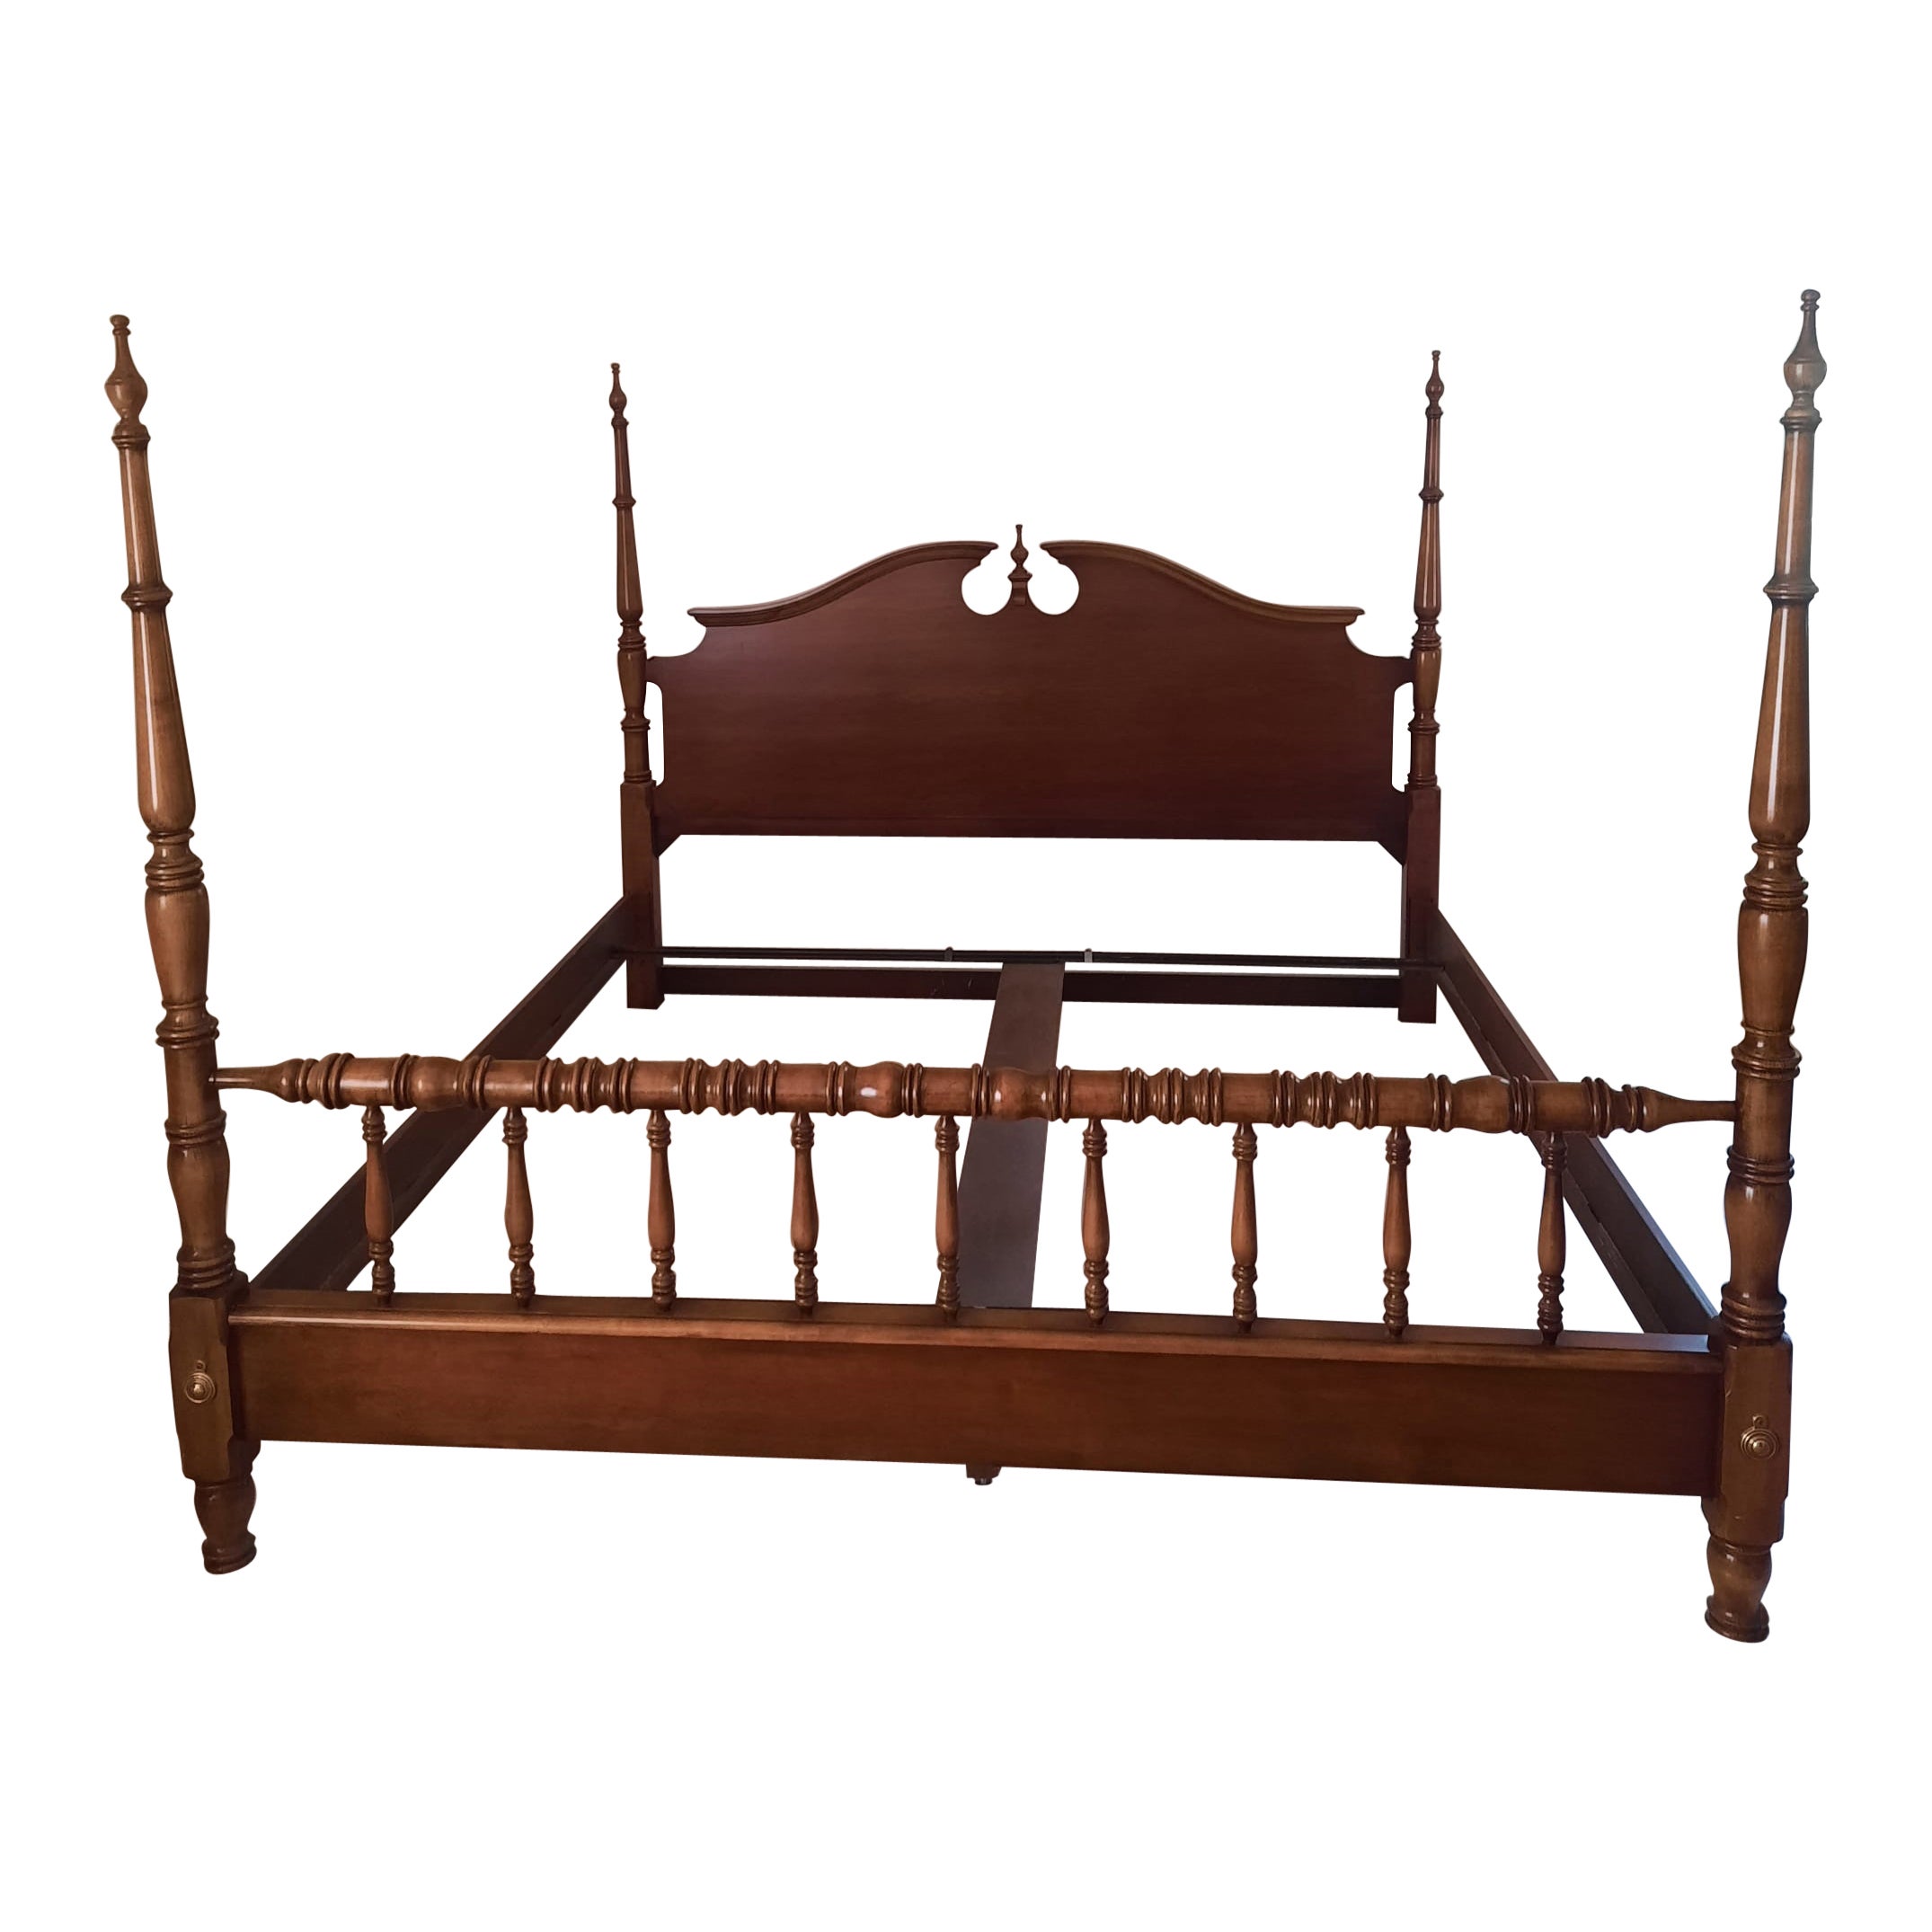 Stanley Furniture's American Craftman Collection Cherry King Size Low Poster Bed